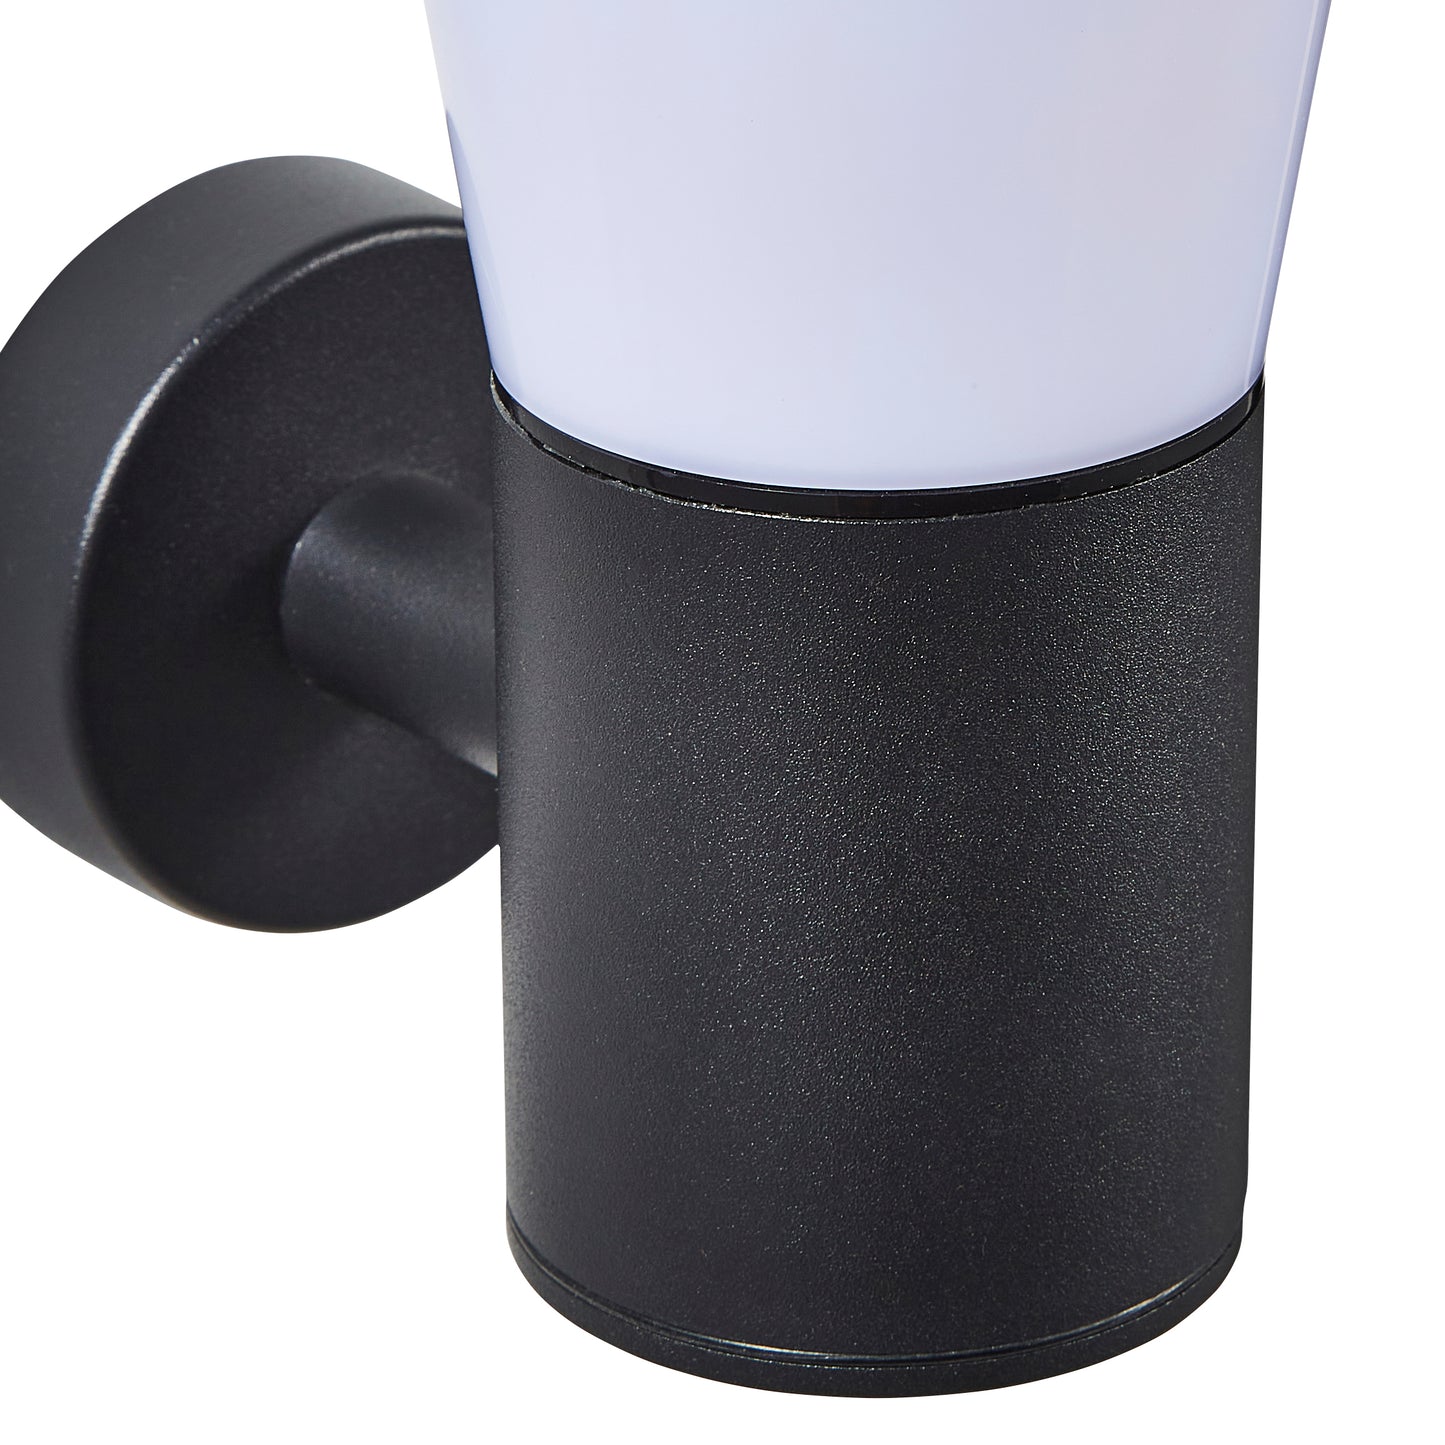 Our OTIS black outdoor wall mounted up and down cylinder outdoor light would look perfect in a modern or more traditional home design. Outside wall lights can provide atmospheric light in your garden, at the front door or on the terrace as well as a great security solution. It is designed for durability and longevity with its robust material producing a fully weatherproof and water resistant light fitting. 